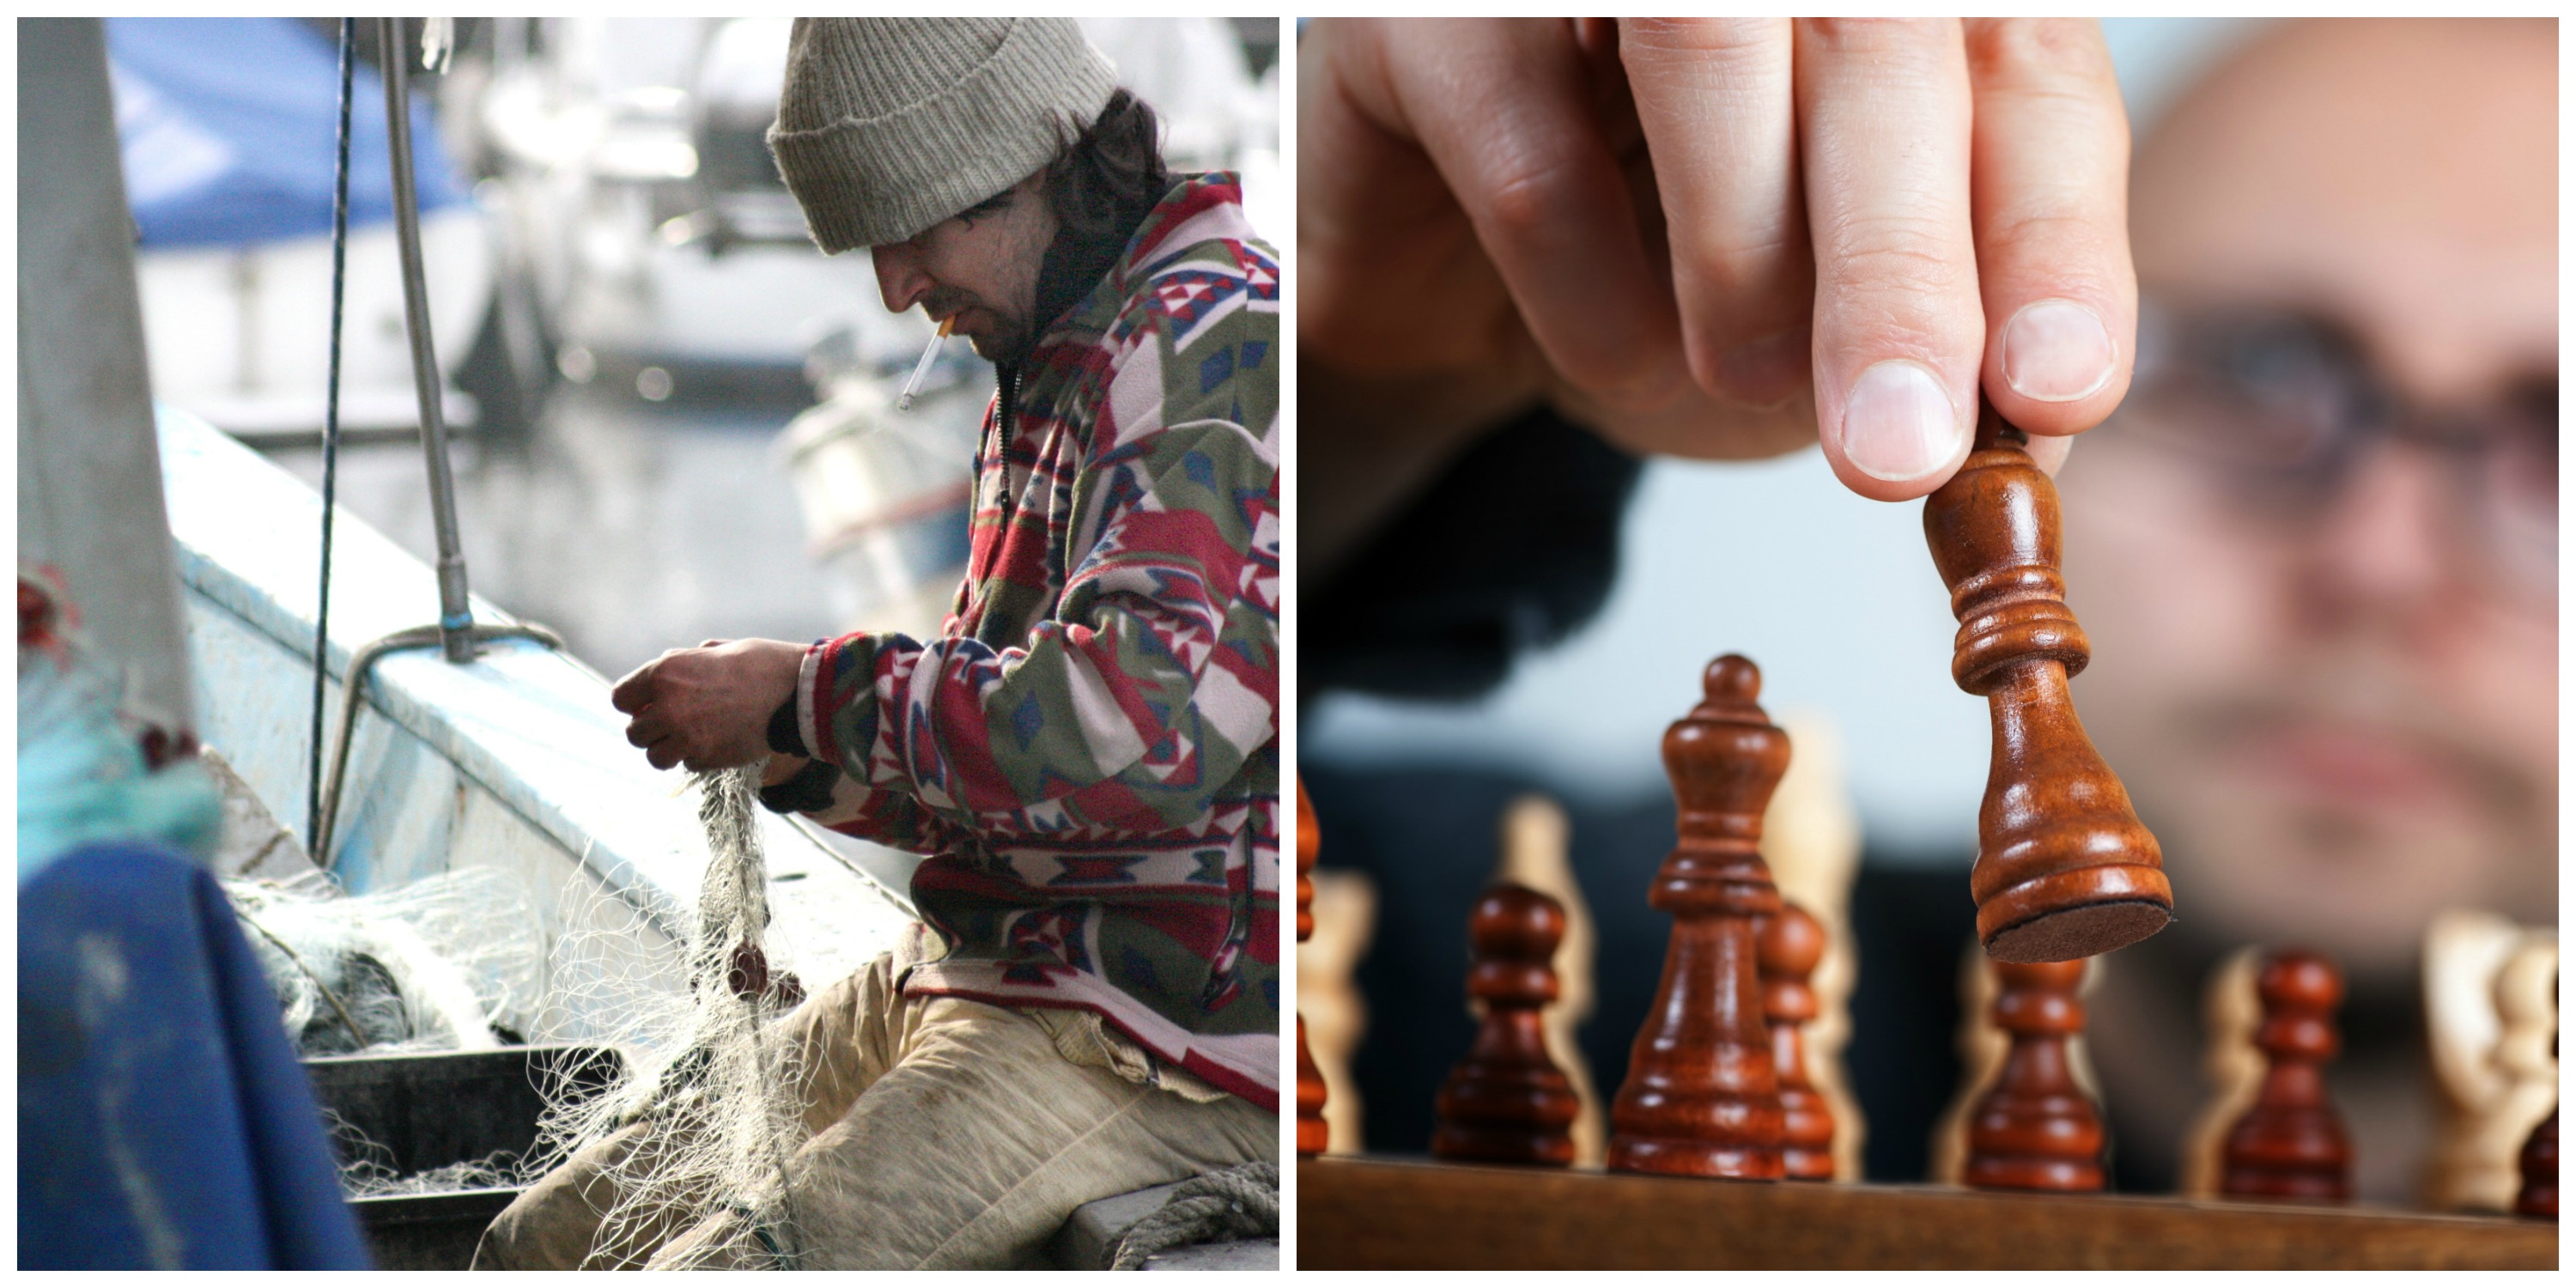 Chess player Fisherman or a real Fisherman?